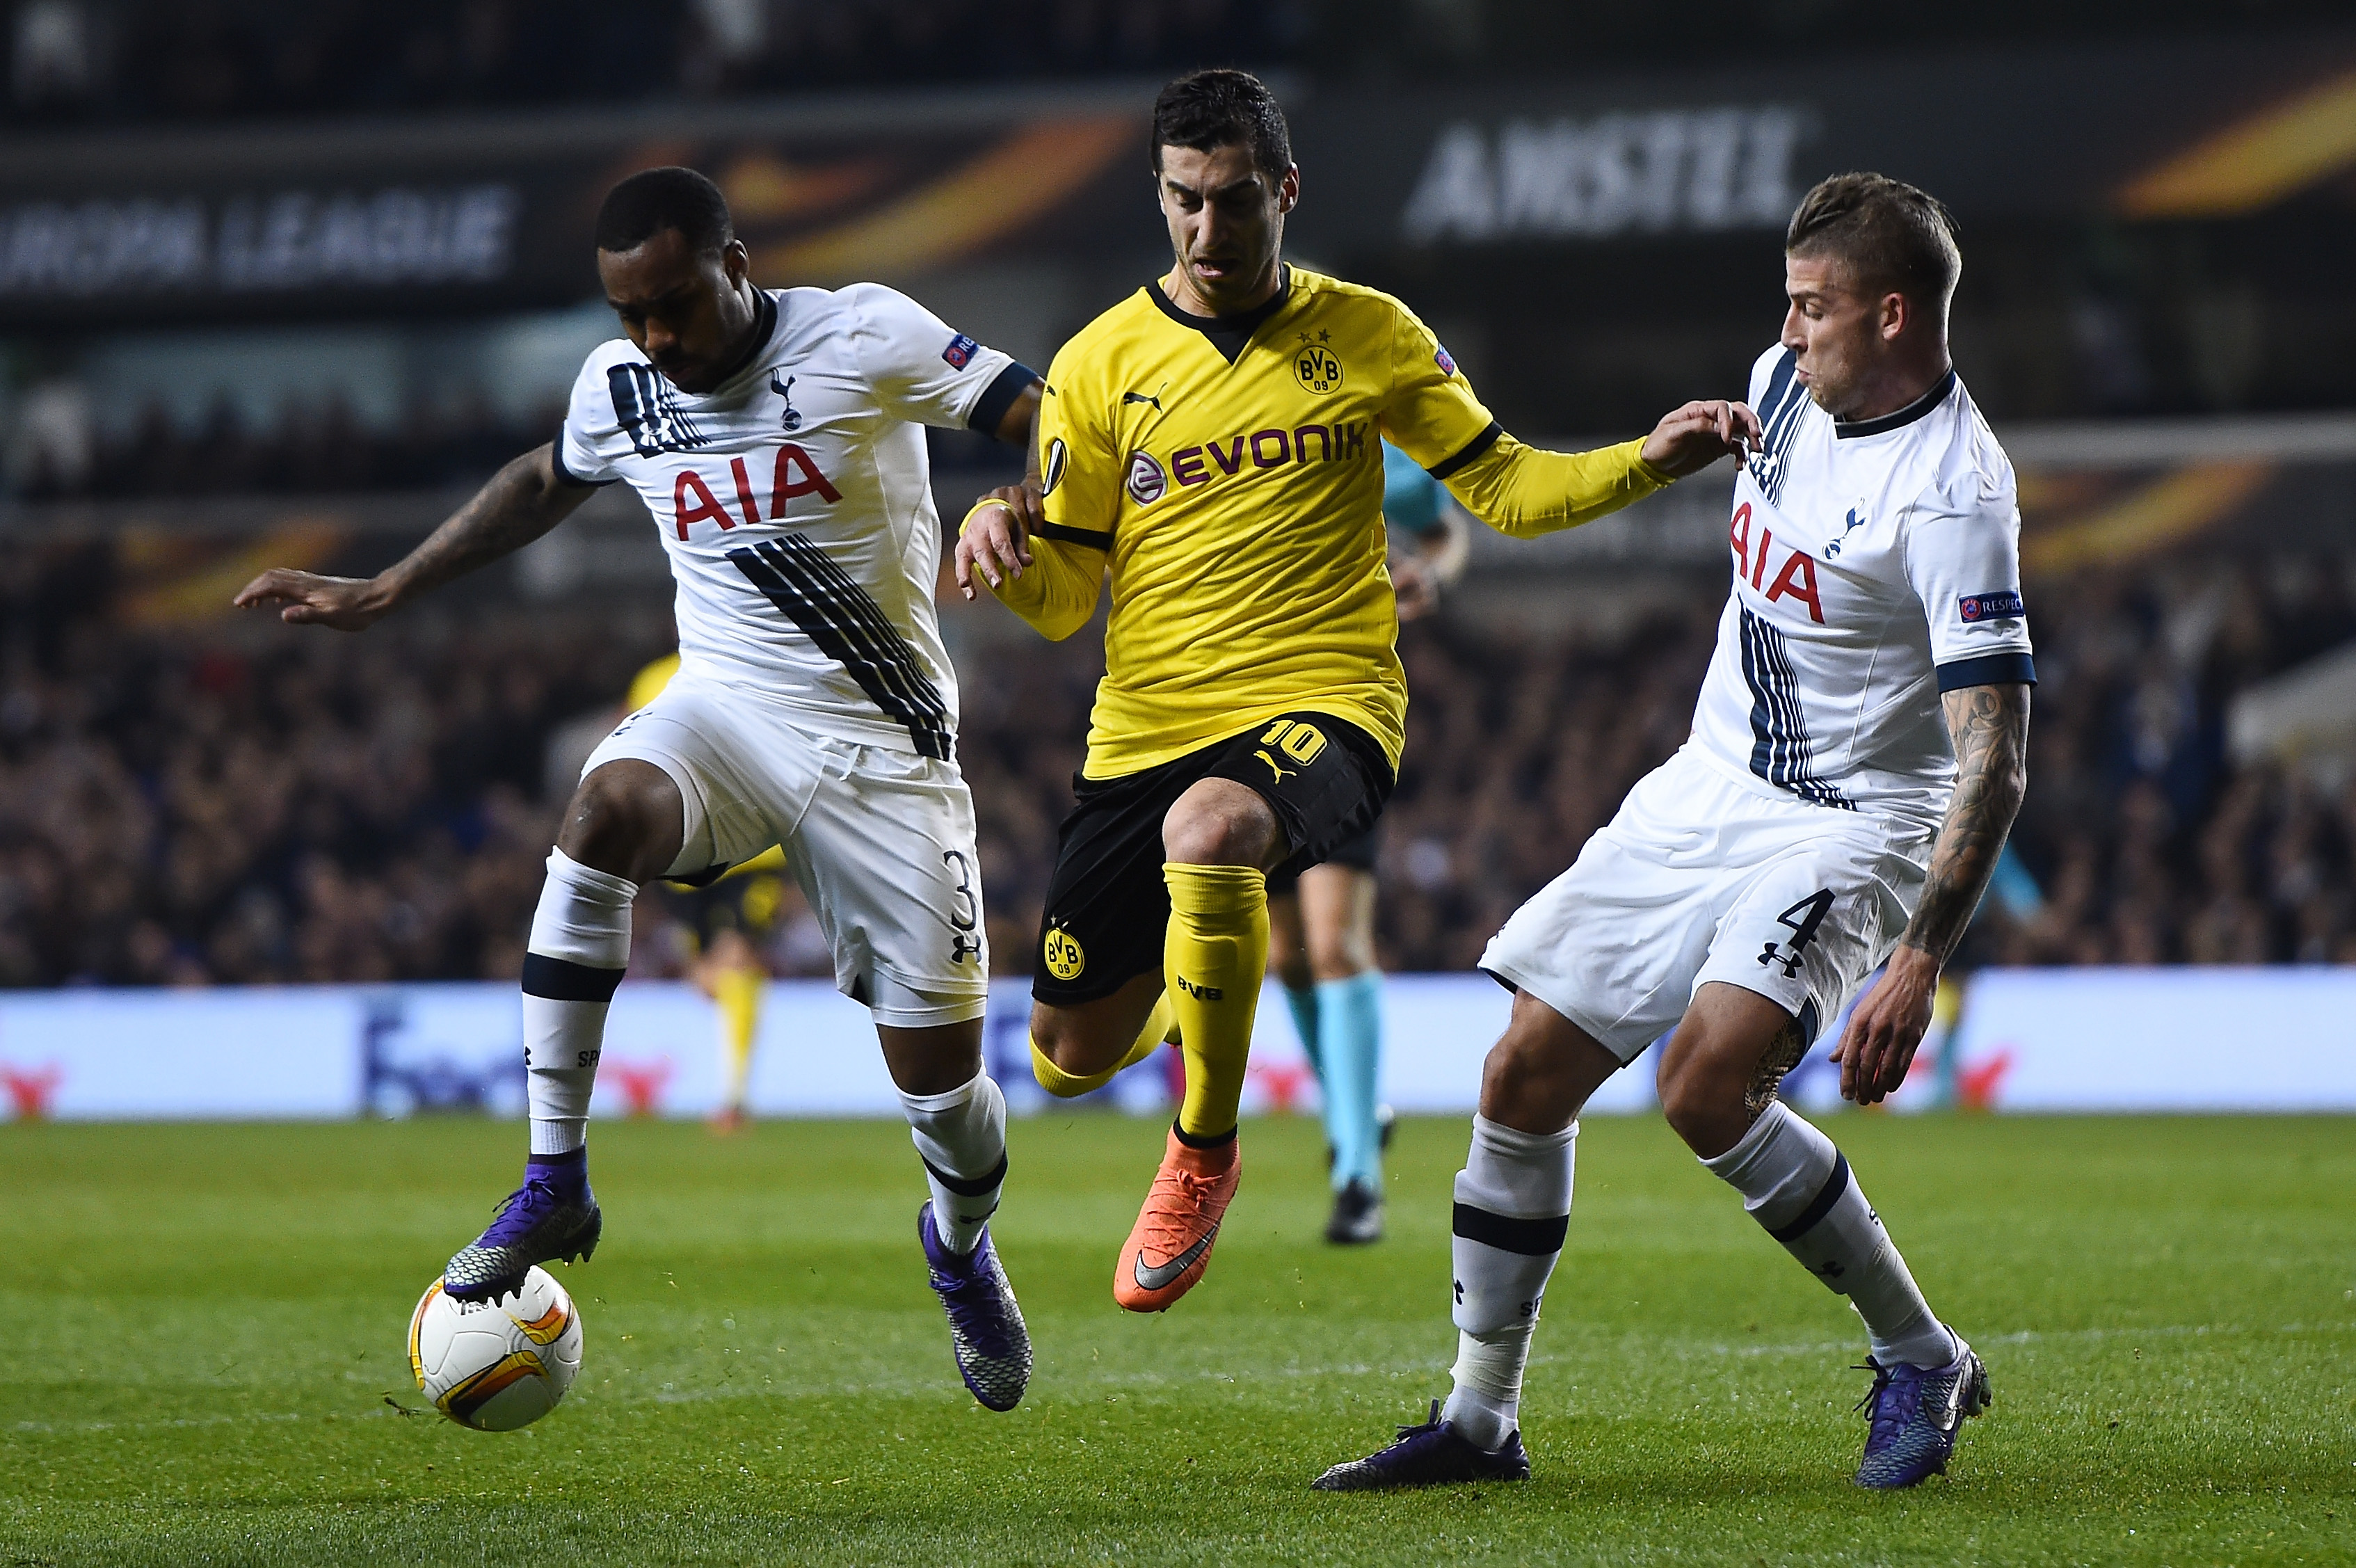 LONDON, ENGLAND - MARCH 17:  Henrikh Mkhitaryan of Borussia Dortmund takes on Danny Rose and Toby Alderweireld of Tottenham Hotspur during the UEFA Europa League round of 16, second leg match between Tottenham Hotspur and Borussia Dortmund at White Hart Lane on March 17, 2016 in London, England.  (Photo by Laurence Griffiths/Getty Images)